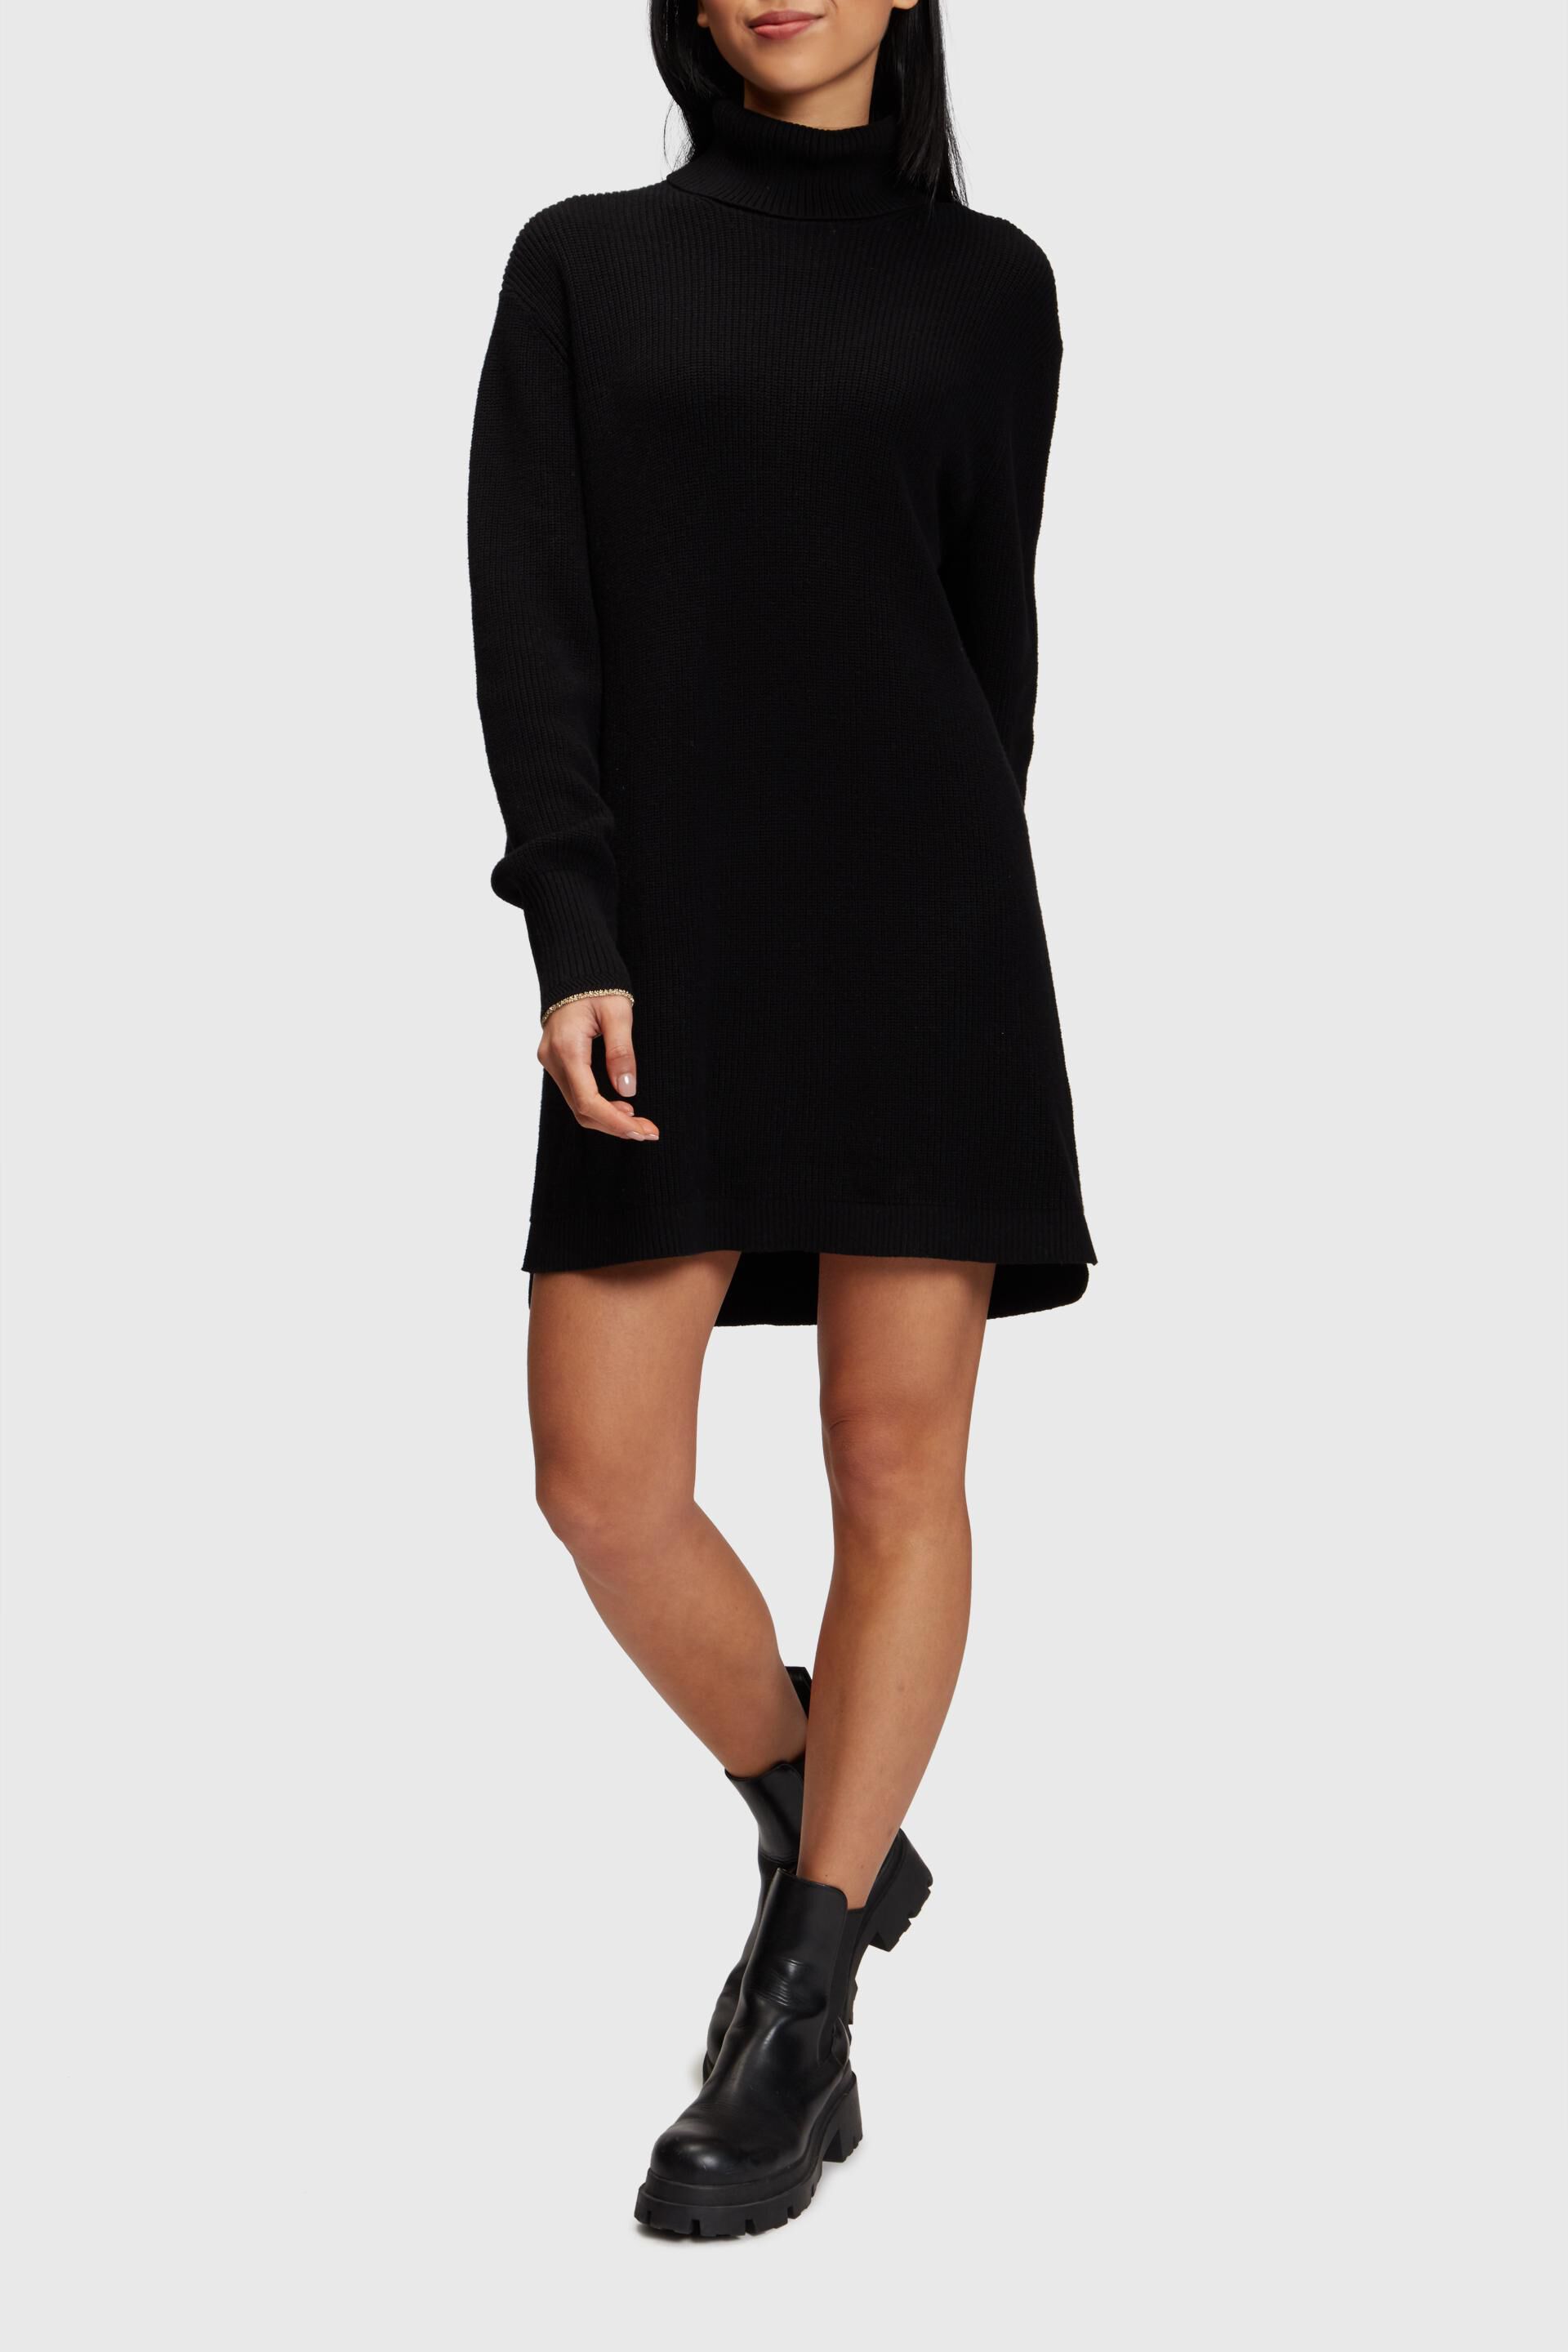 Black Turtleneck Dress: 3 Outfit Options - Lipgloss and Crayons